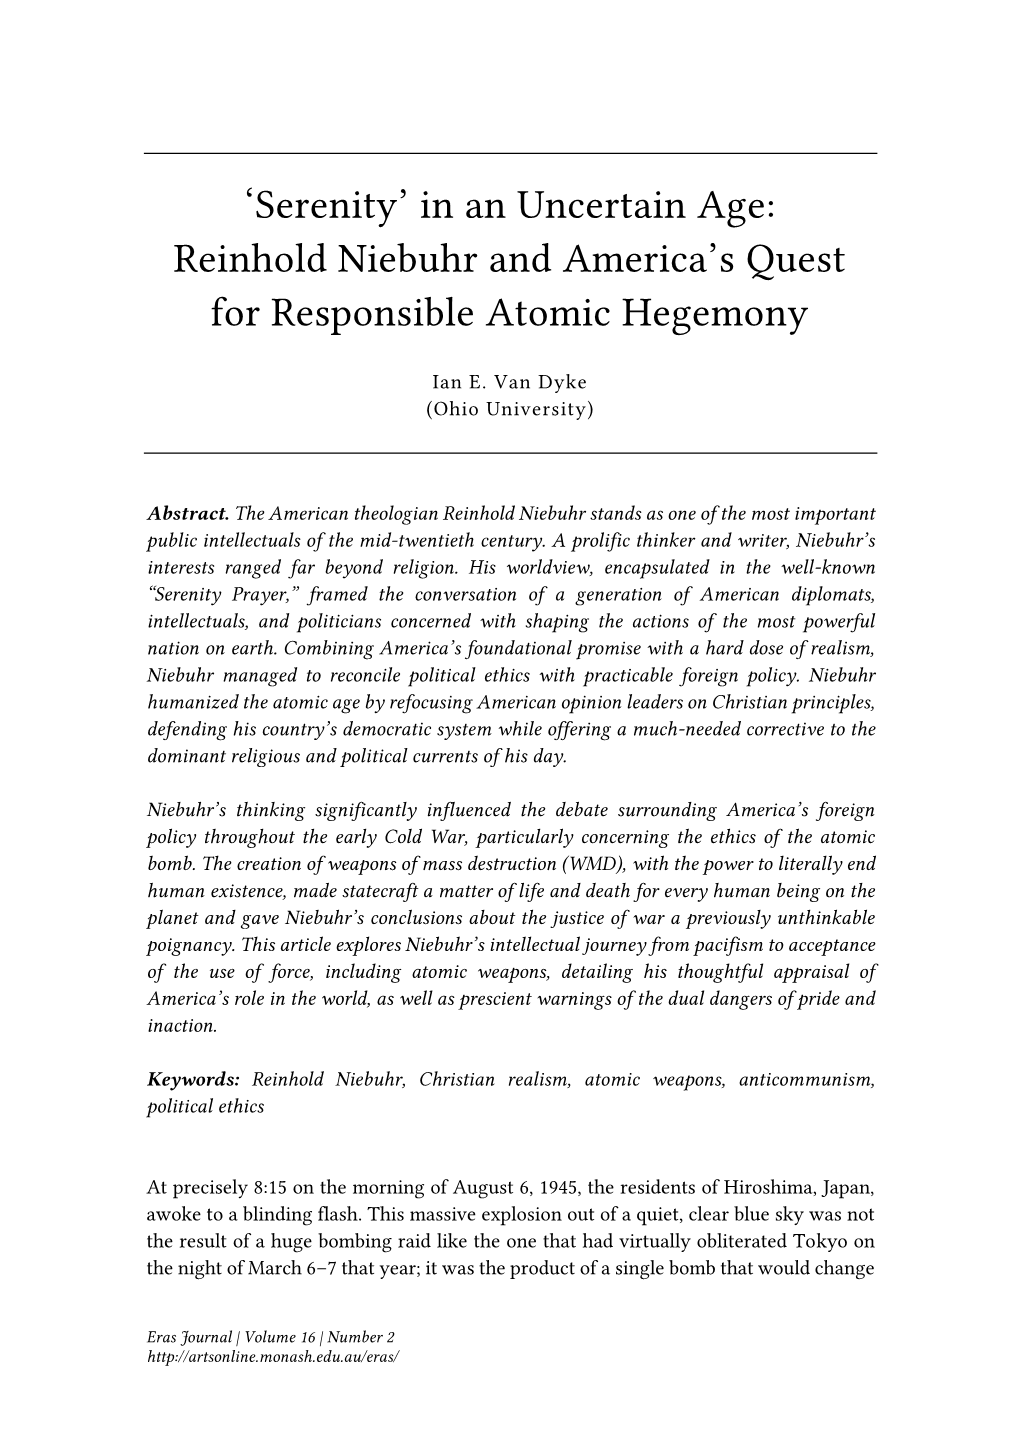 Reinhold Niebuhr and America's Quest for Responsible Atomic Hegemony